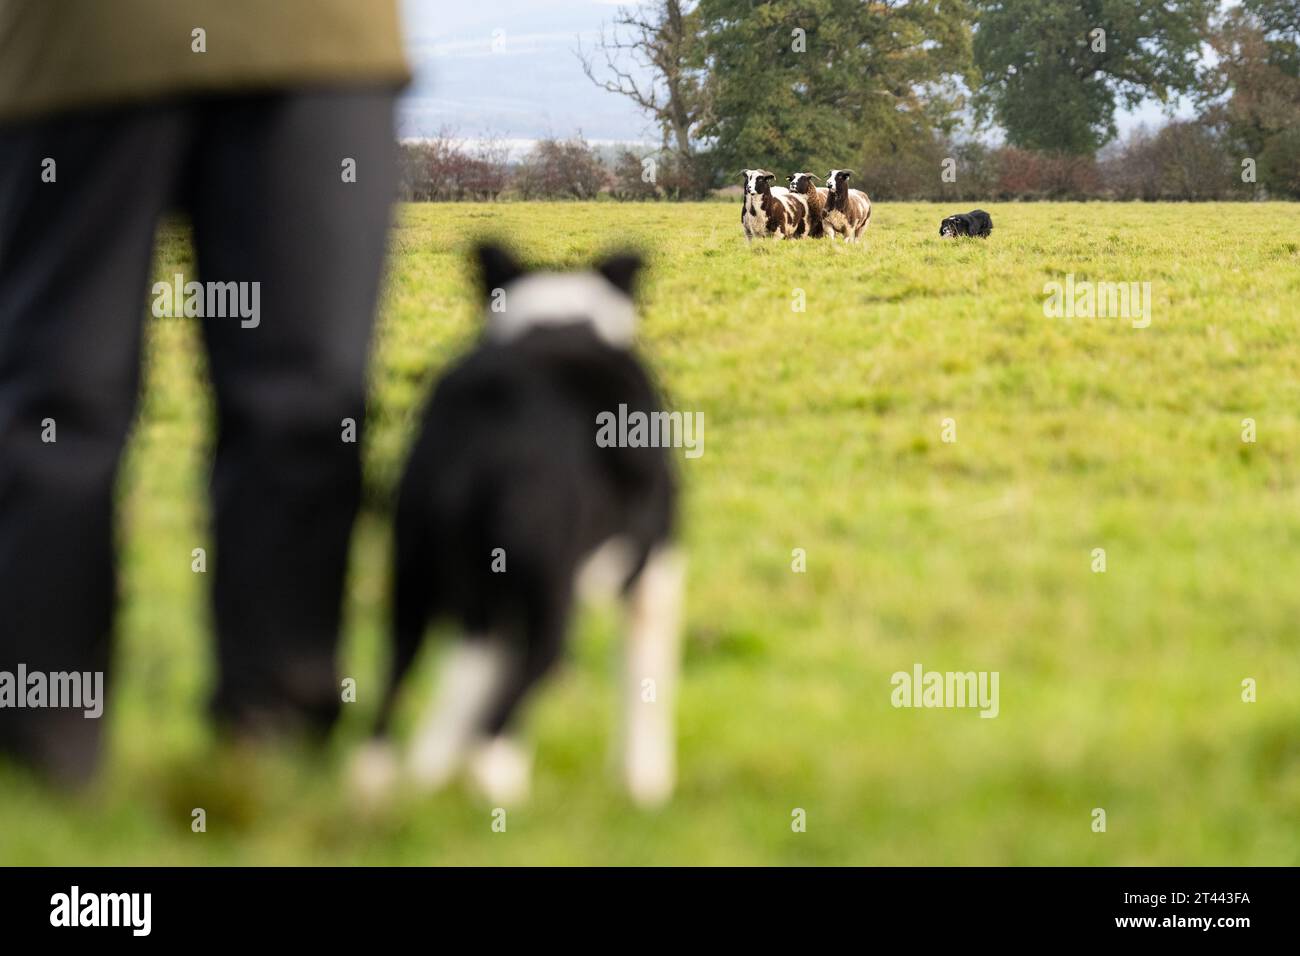 Kippen, Stirling, Scotland, UK. 28th Oct, 2023. 'Checking out the Competition' a sheepdog waiting its turn intently watches another dog running with Jacob Sheep at the Kippen Open Sheepdog Trial Credit: Kay Roxby/Alamy Live News Stock Photo